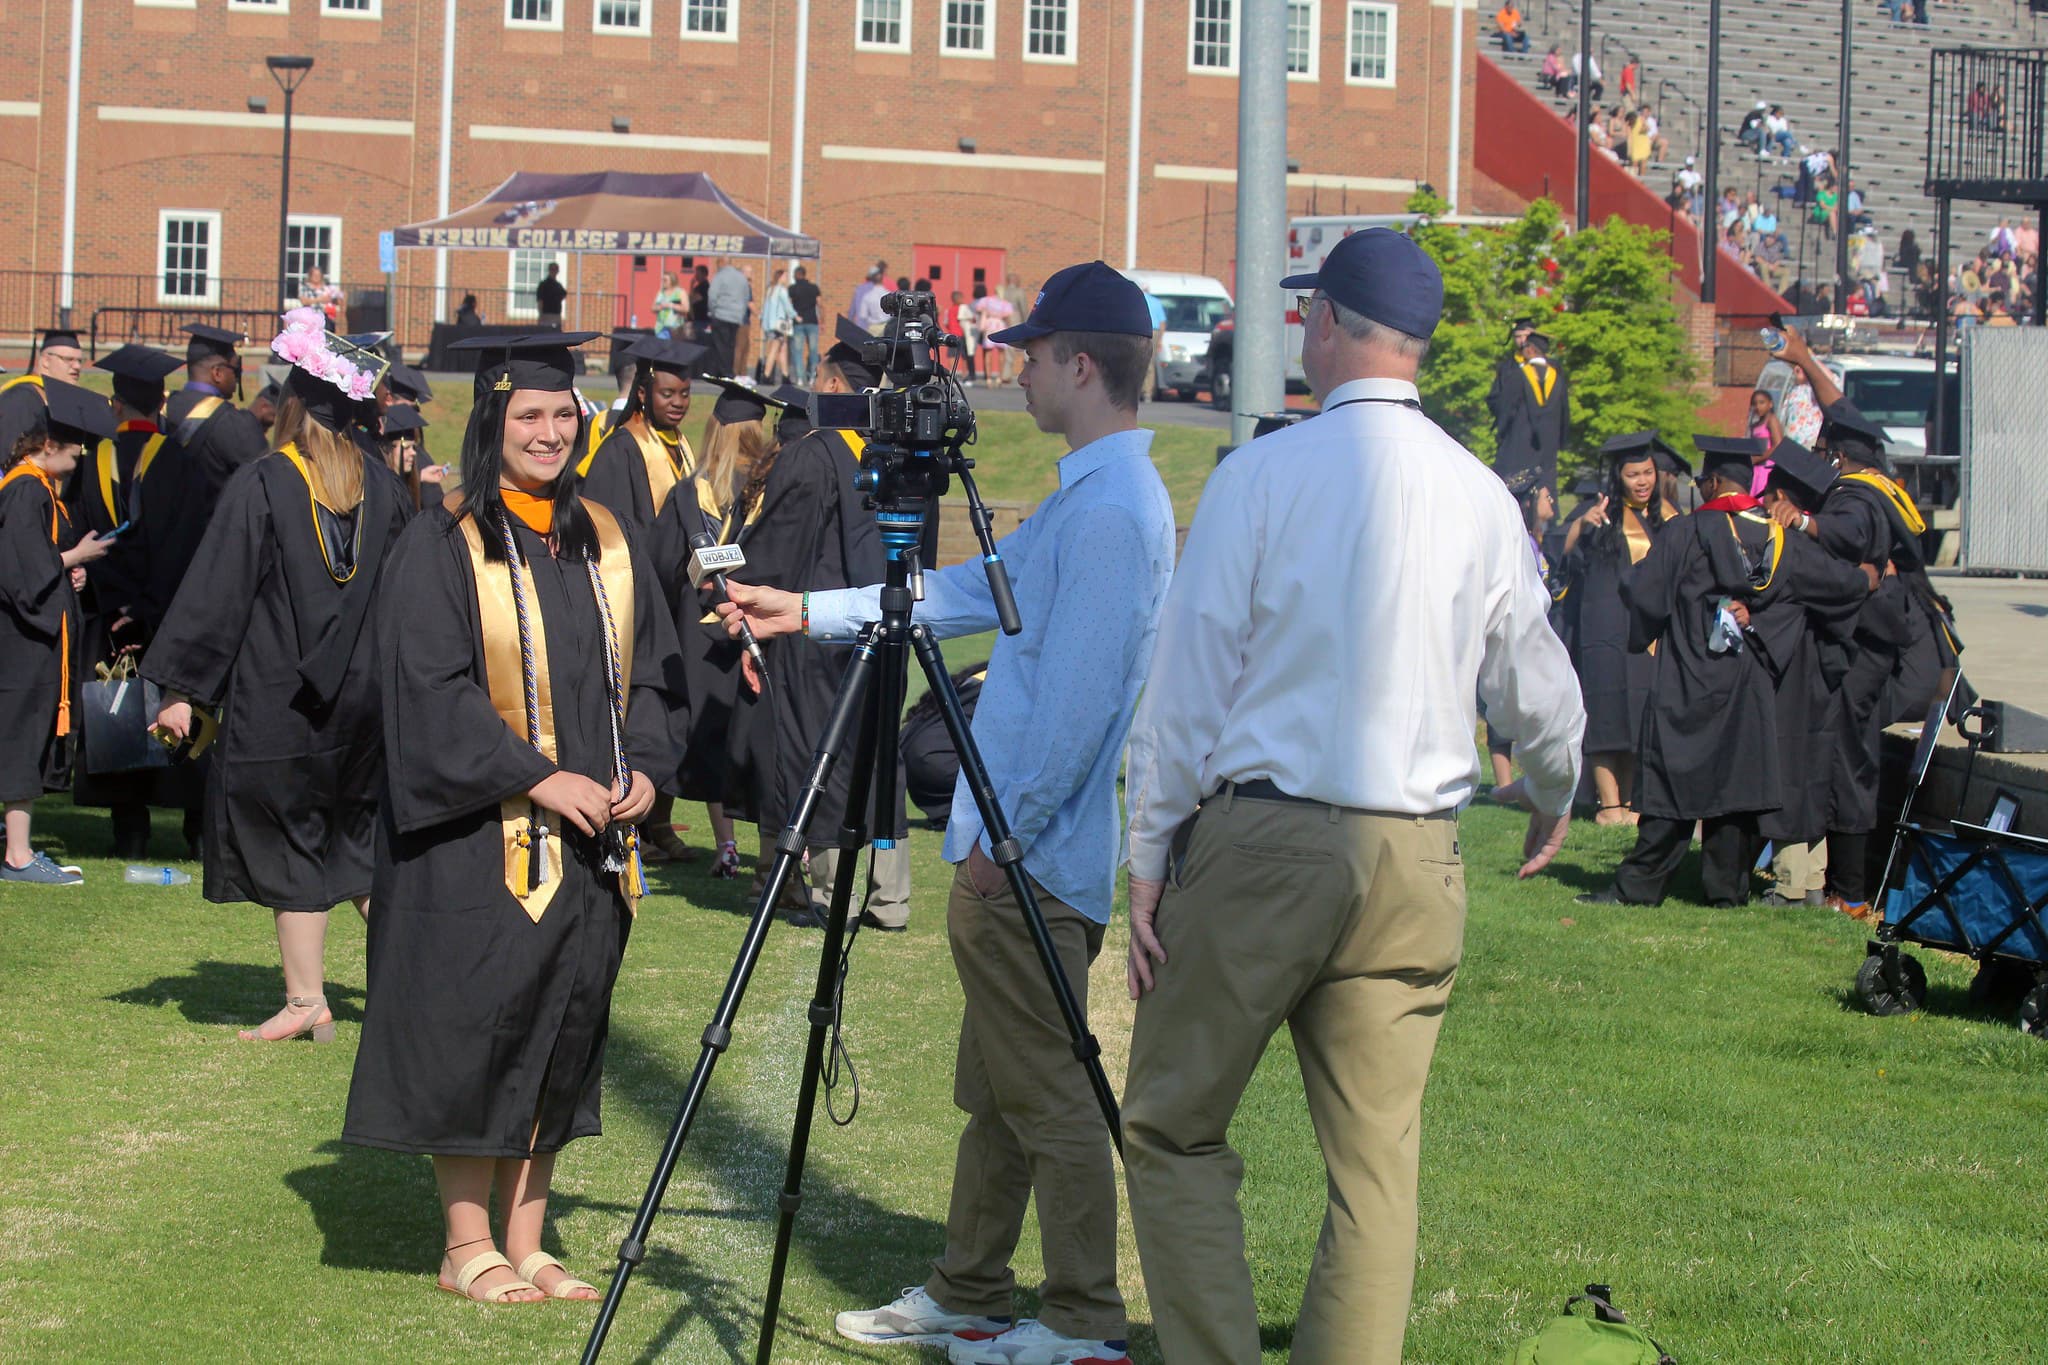 First Ferrum Promise graduate Claudia Cooke interview with WDBJ7's Joe Dashiell